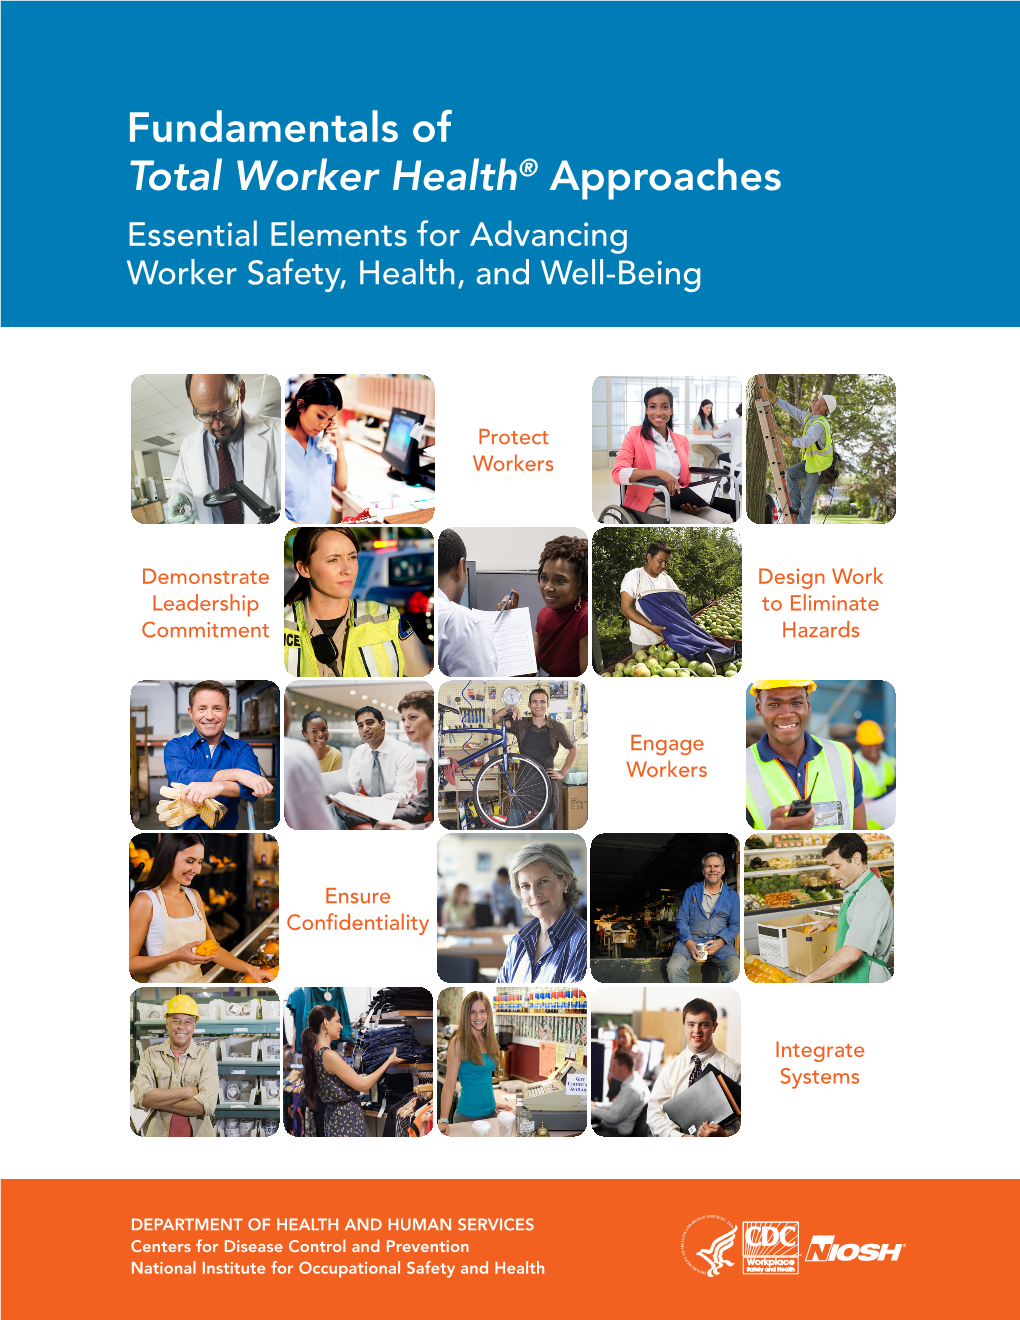 Fundamentals of Total Worker Health Approaches: Essential Elements for Advancing Worker Safety, Health, and Well-Being